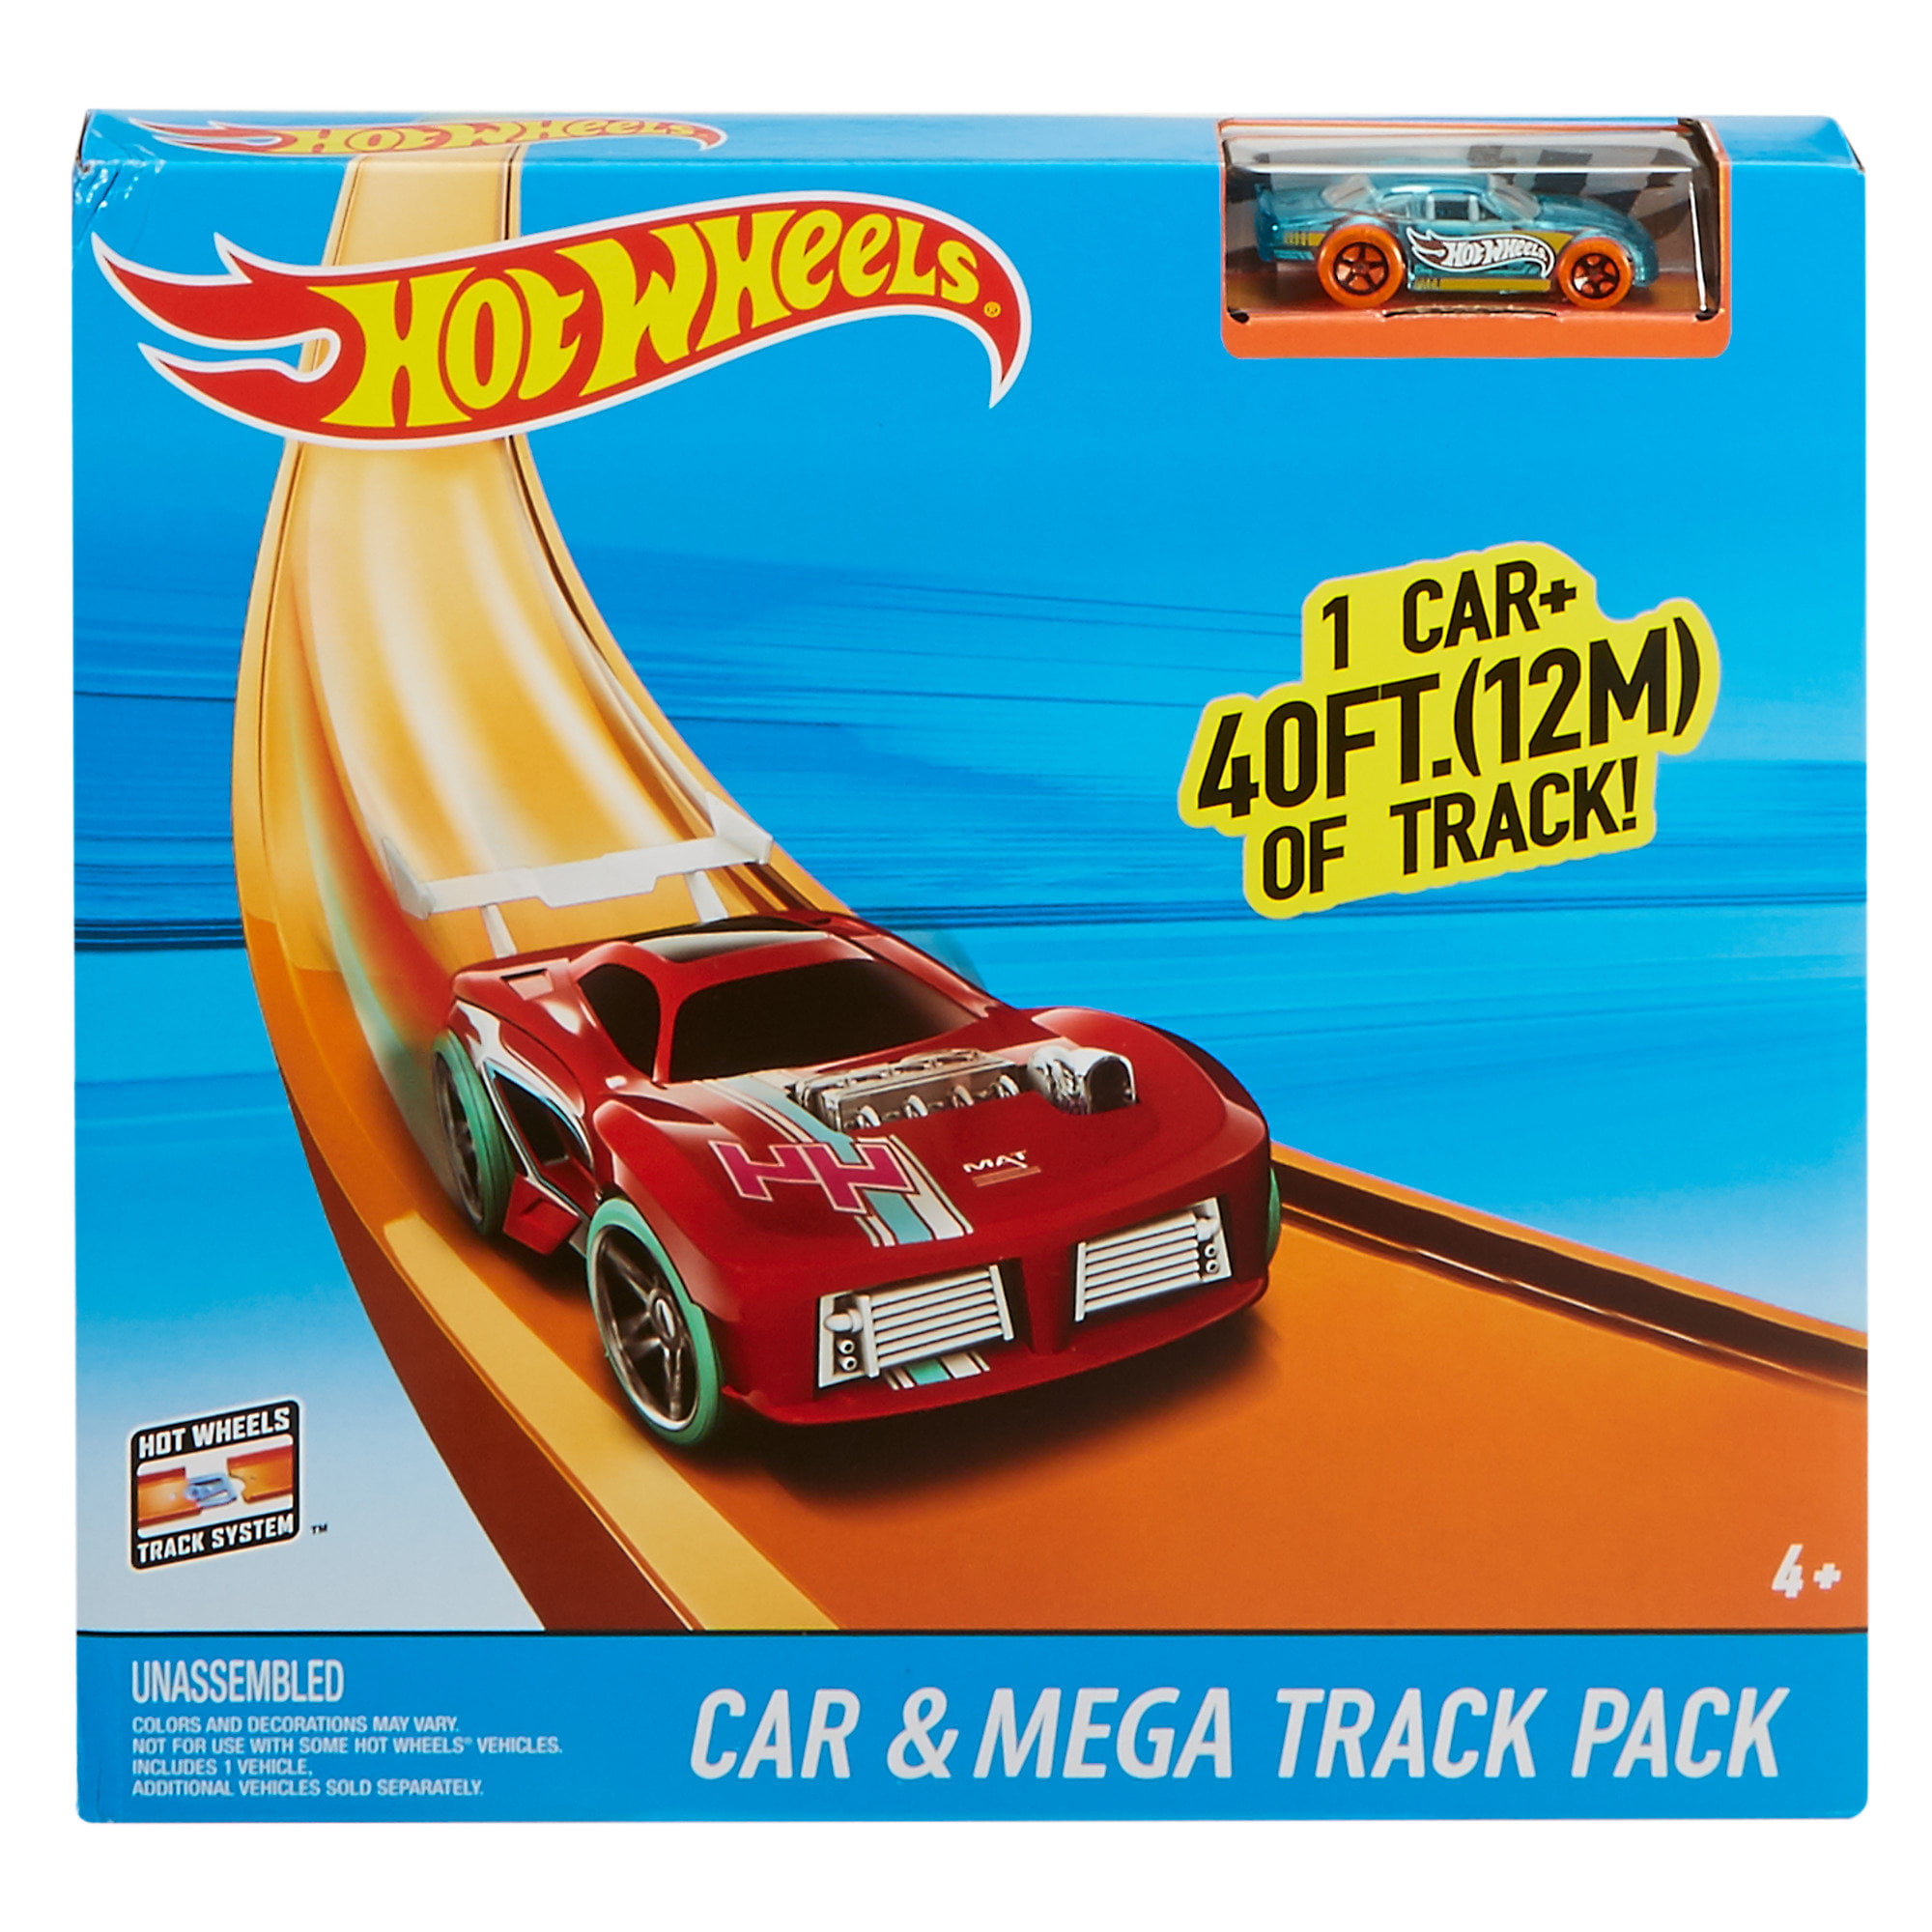 15ft Long Hot Wheels Car & Track Pack BHT77 37 Pieces 